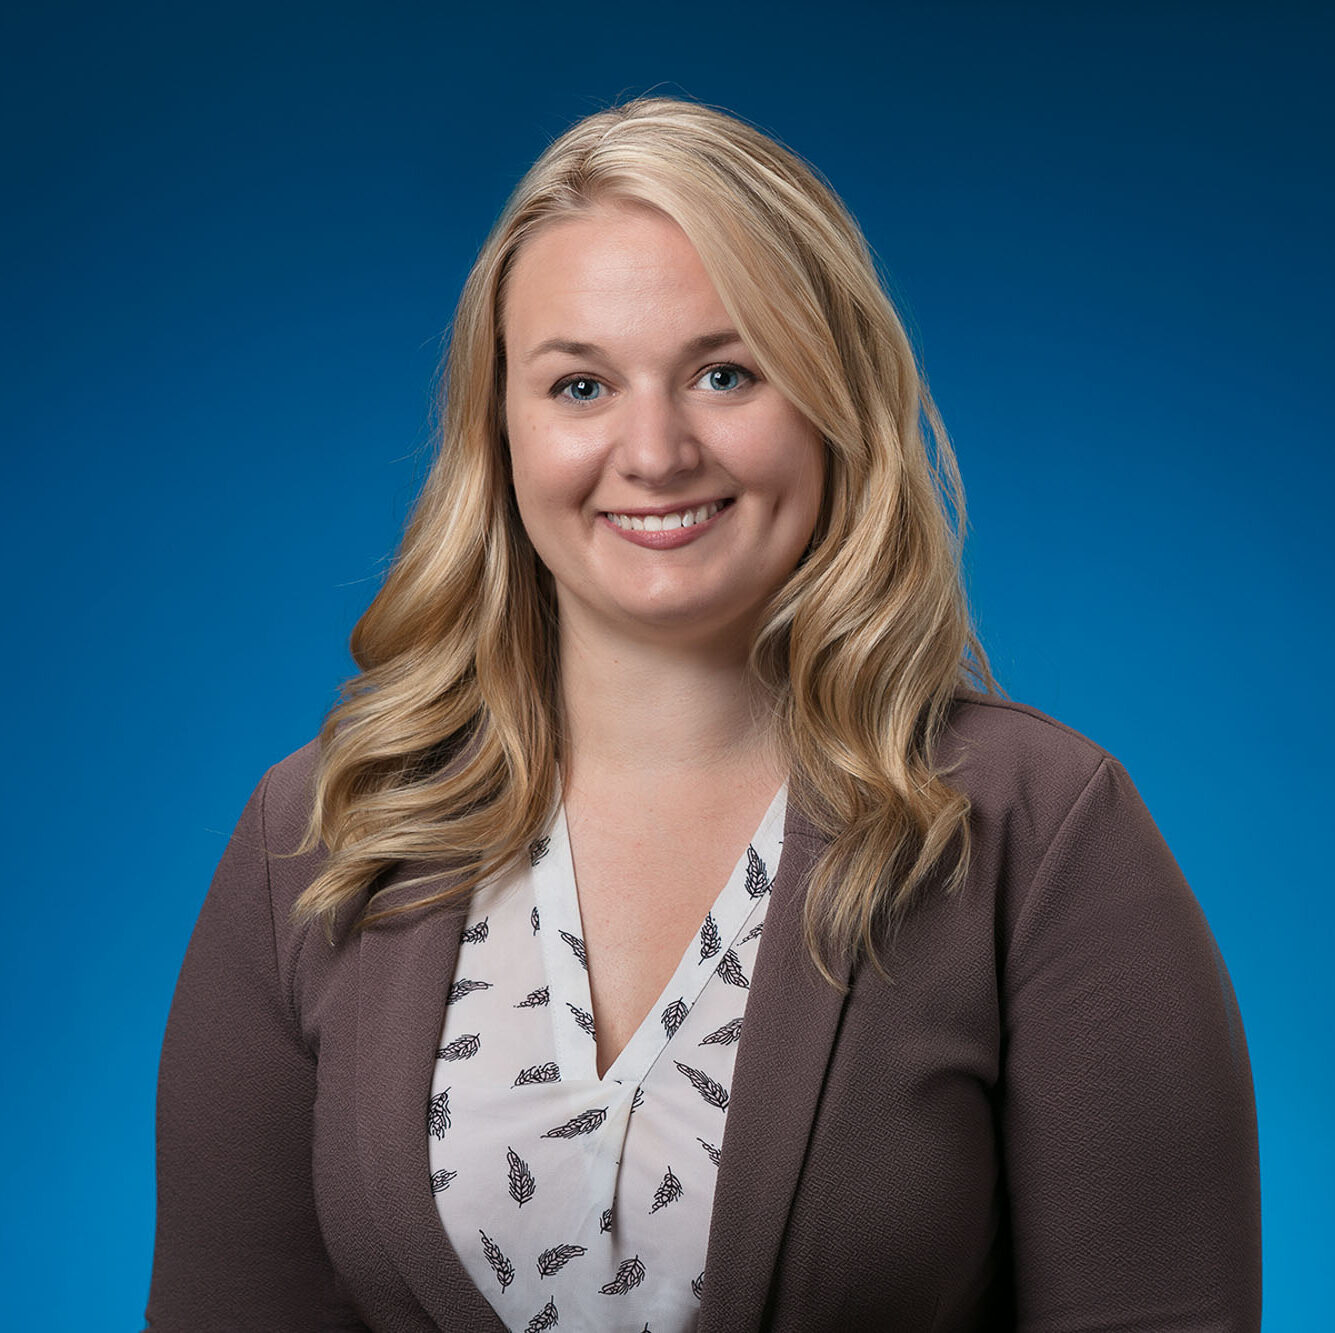 Tianna Hughes, APRN, CNP is smiling in front of a bright blue background.